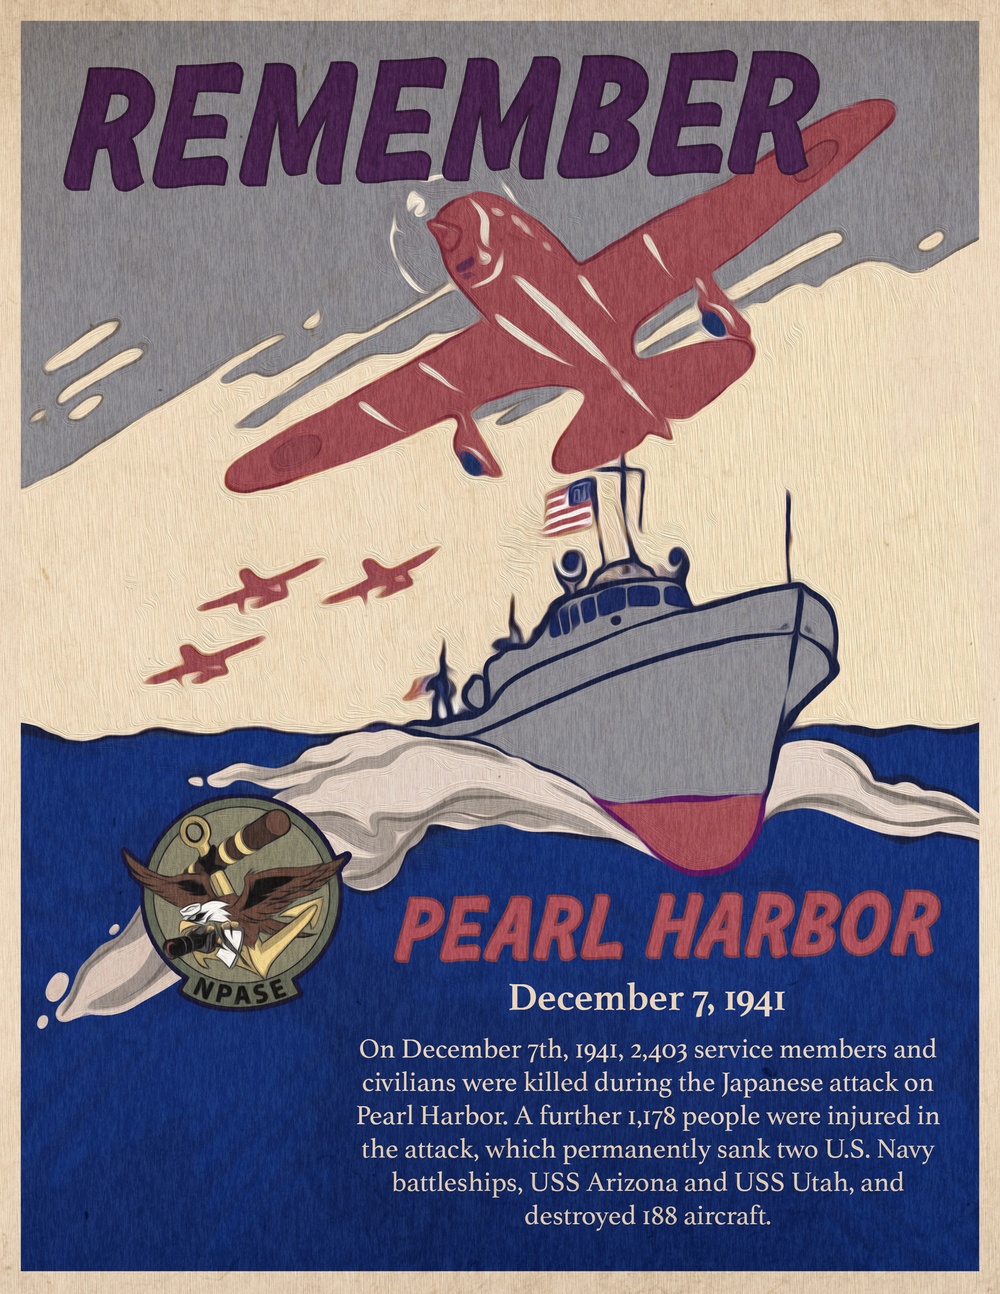 NPASE West Pearl Harbor Remembrance Graphic